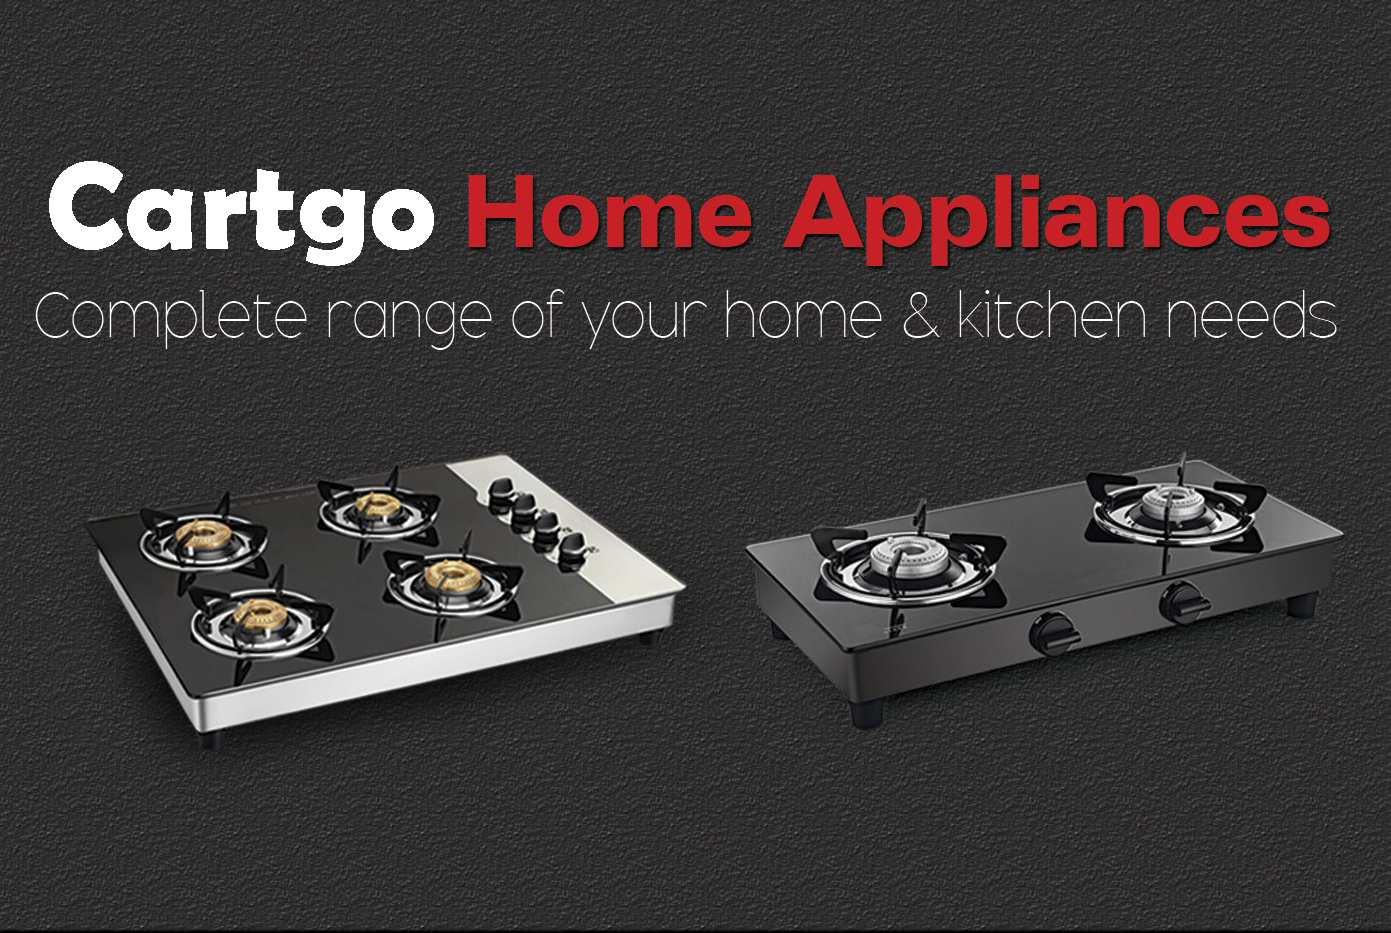 Cartgo - HOW TO GET THE BEST FROM YOUR GLASS COOKTOP